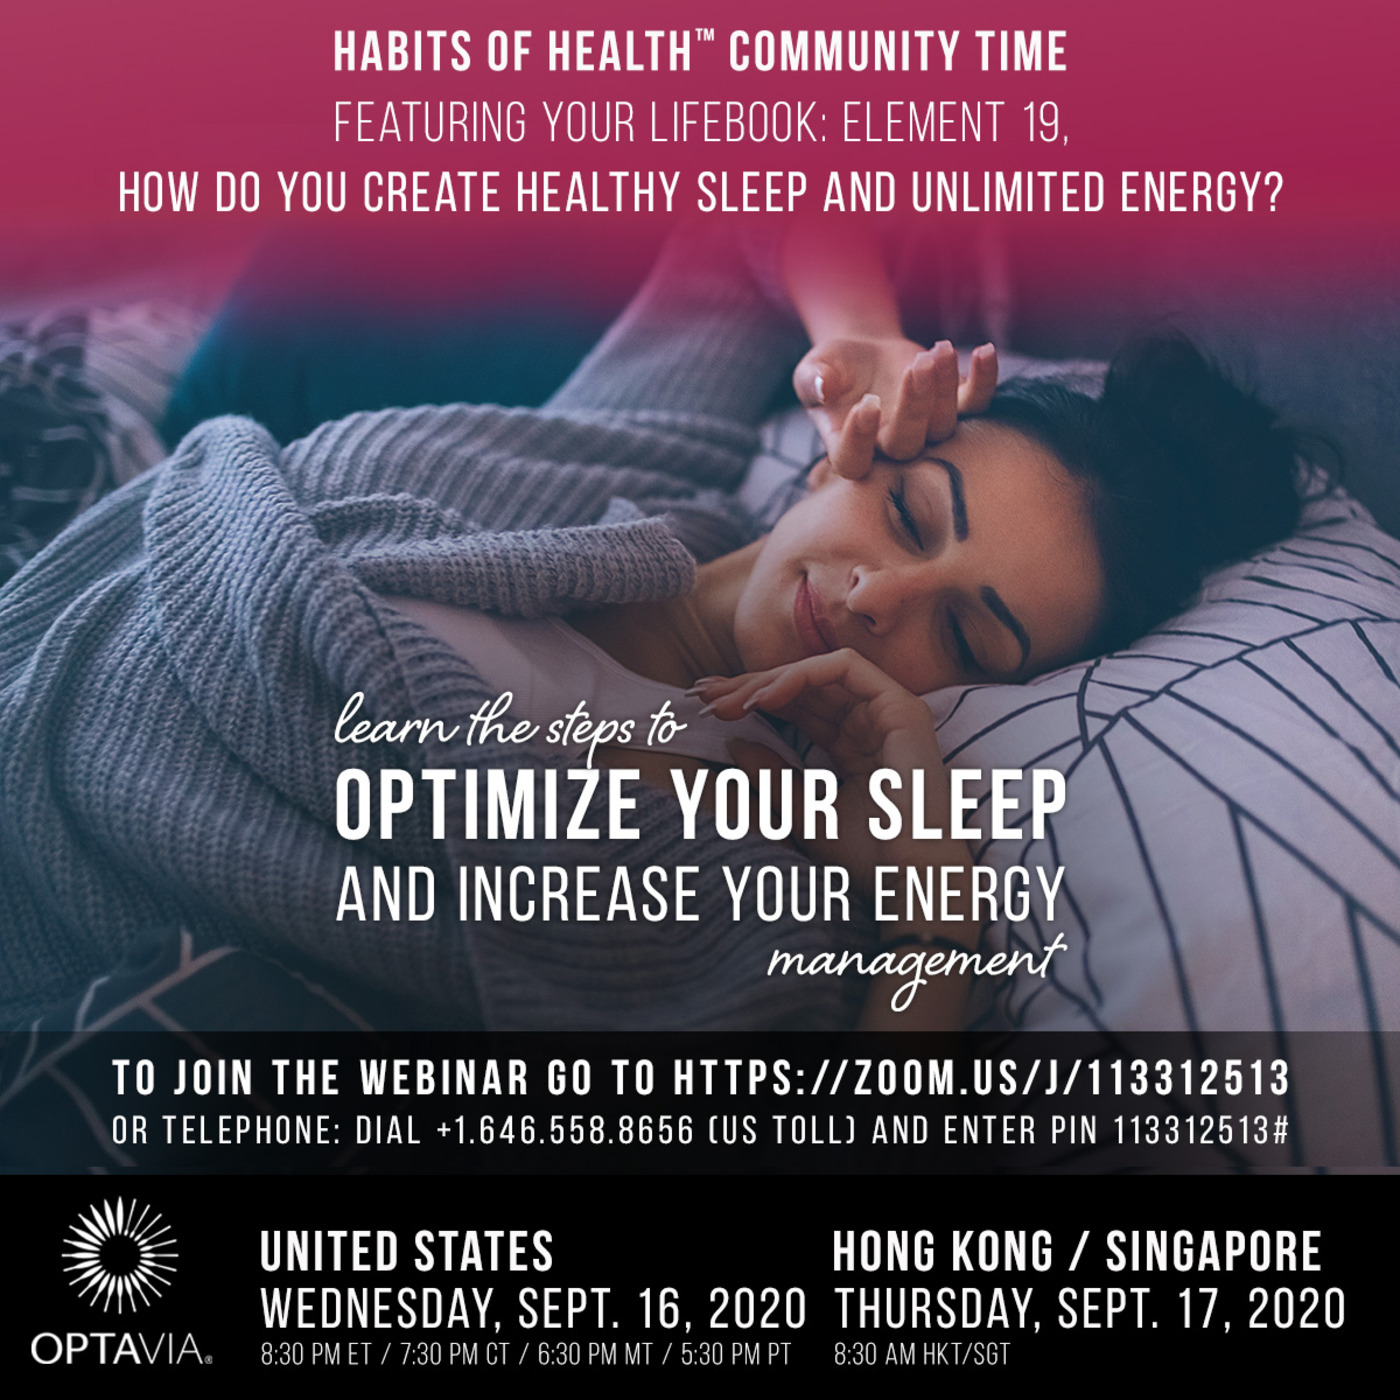 Your LifeBook, Element 19: How Do You Create Healthy Sleep and Unlimited Energy?